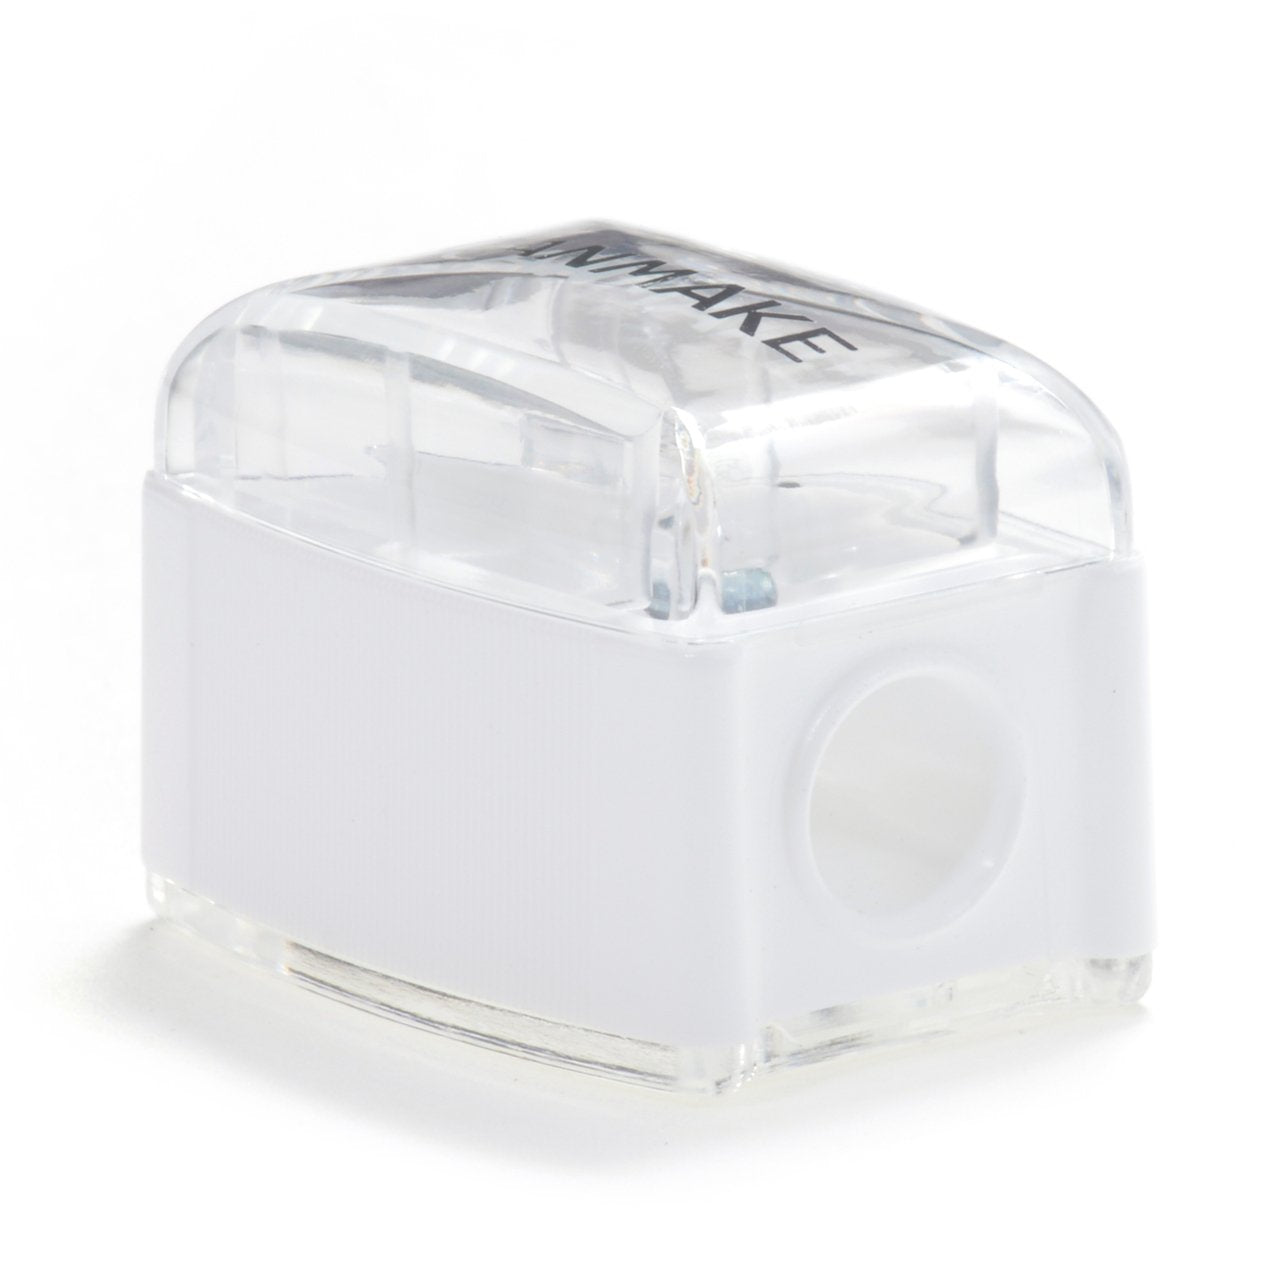 Canmake Pencil Sharpener R - High - Quality Durable Sharpener from Canmake